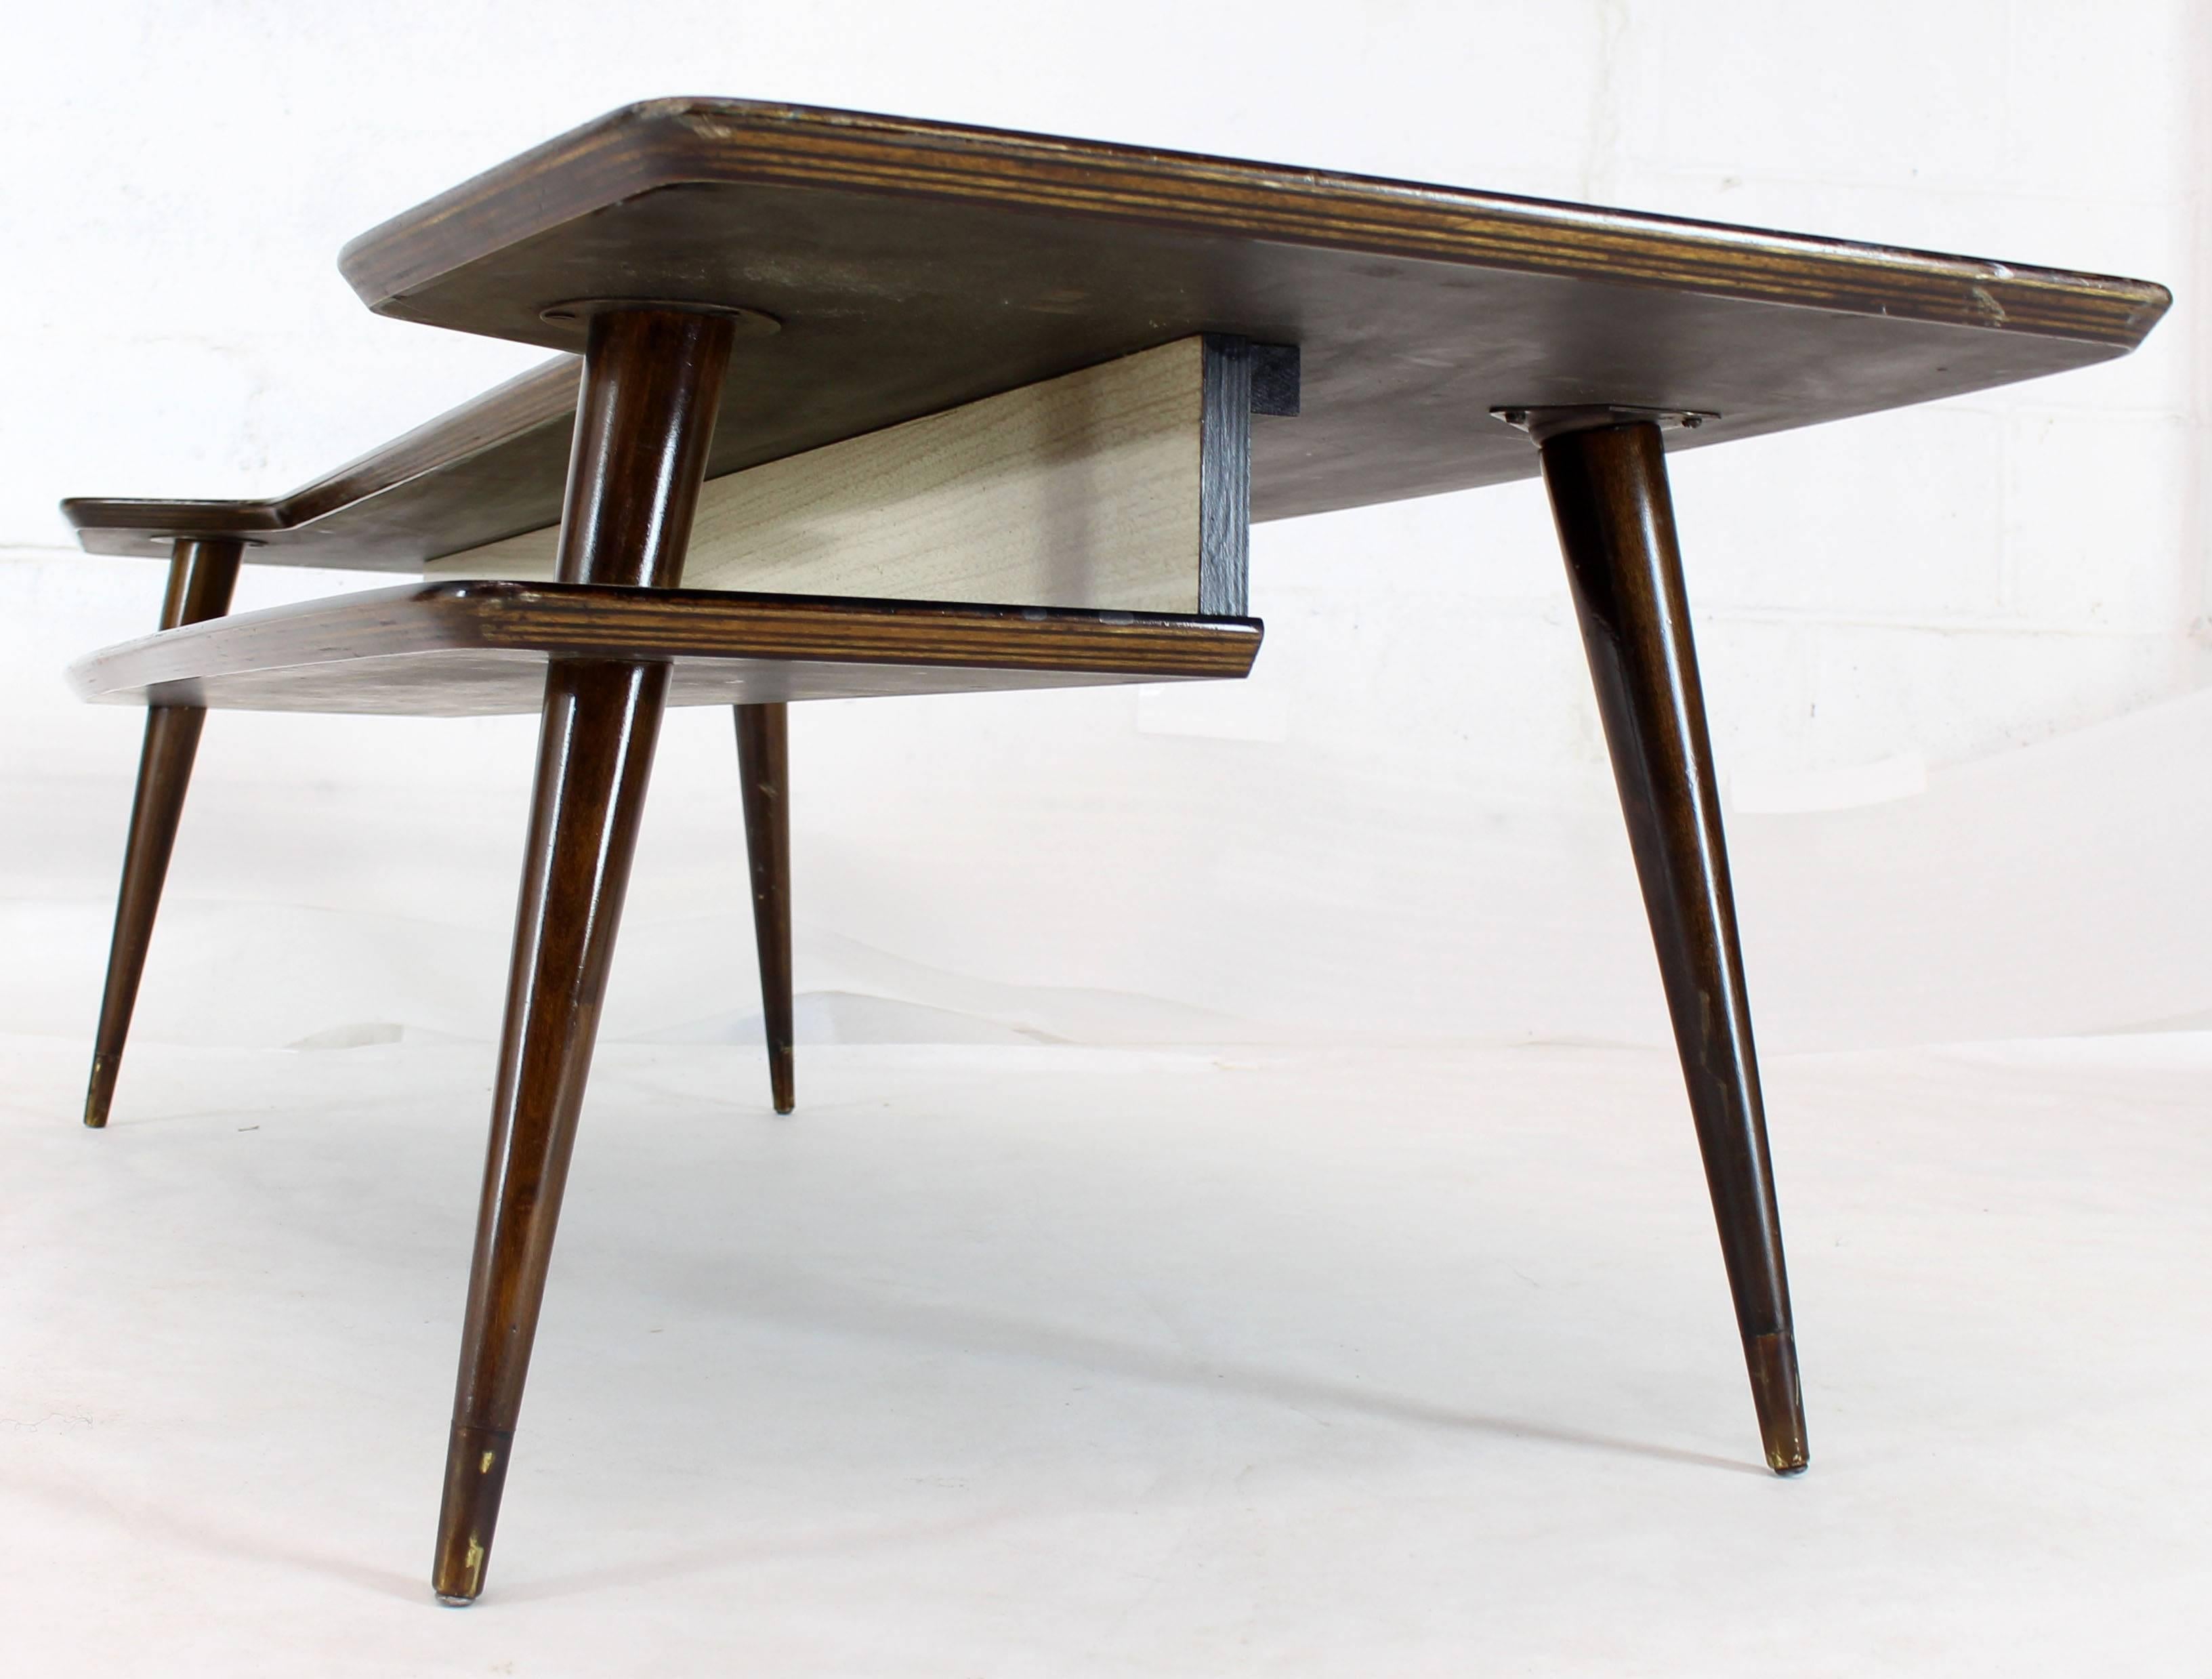 Italian Modern Step Coffee Table with Shelf In Excellent Condition For Sale In Rockaway, NJ